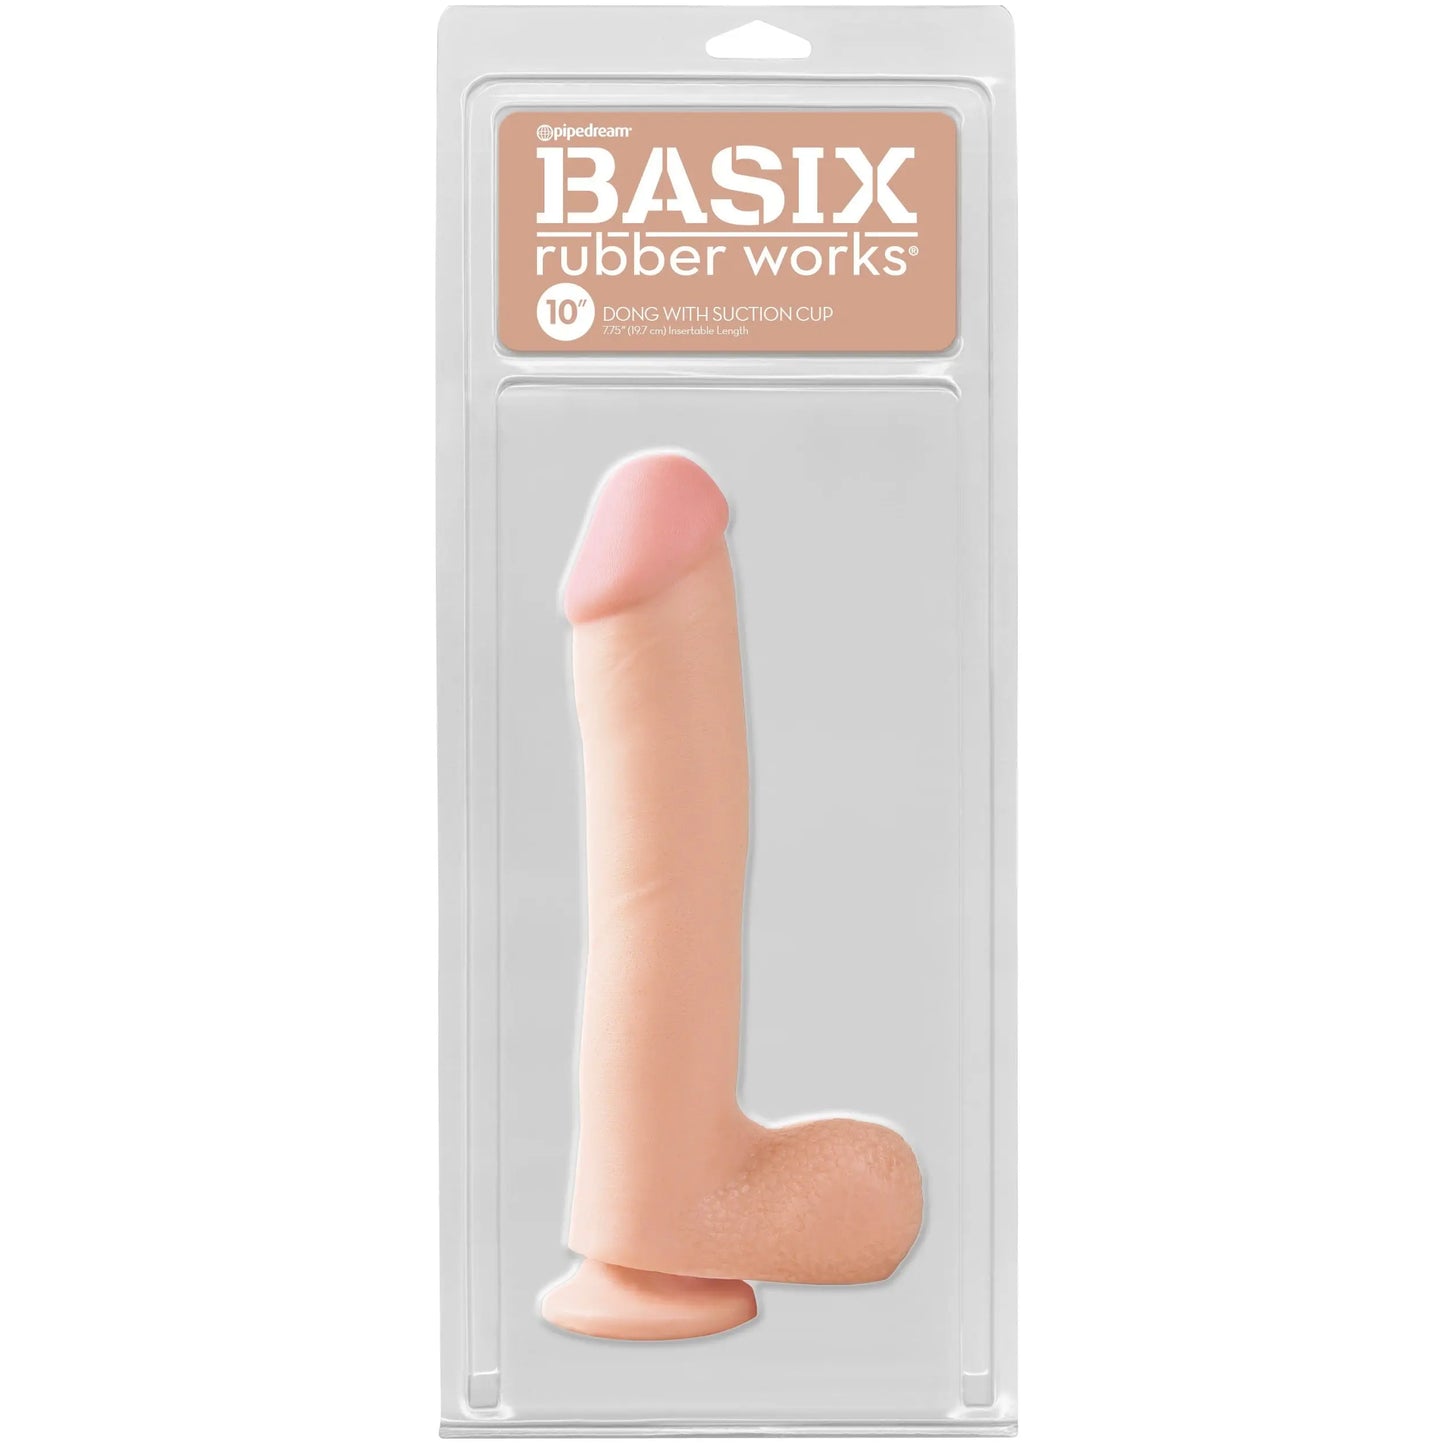 Basix Rubber Works - 10 Inch Dong With Suction Cup - Flesh